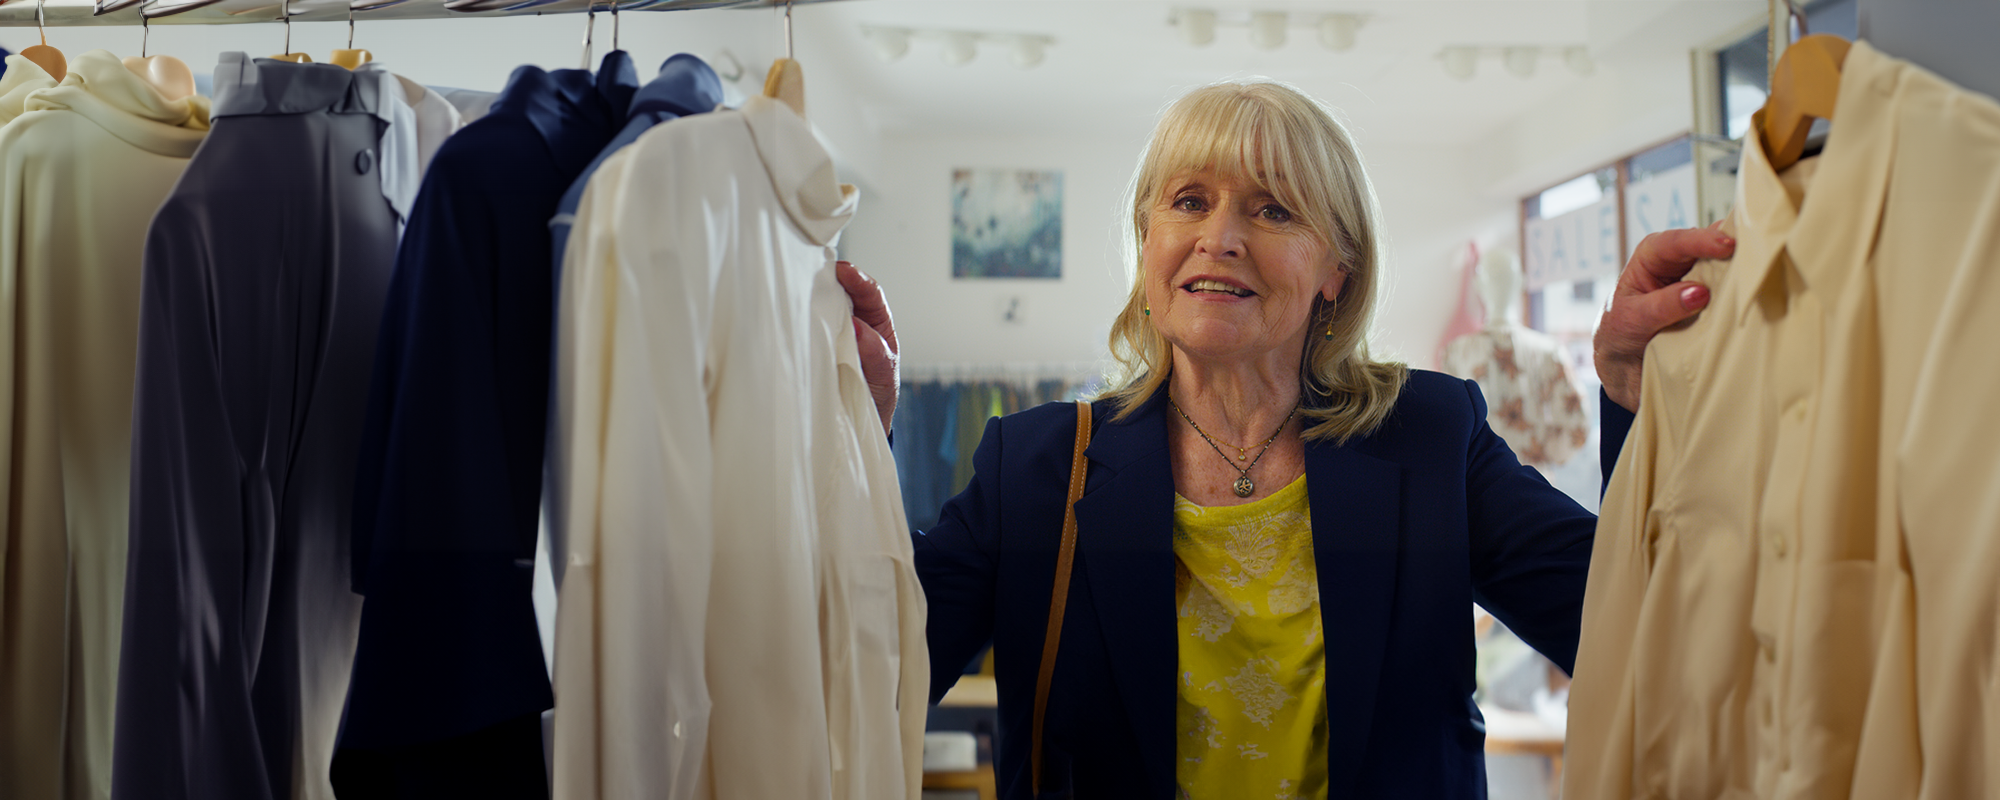 Sue Cook With Clothes Rail From TV Advert